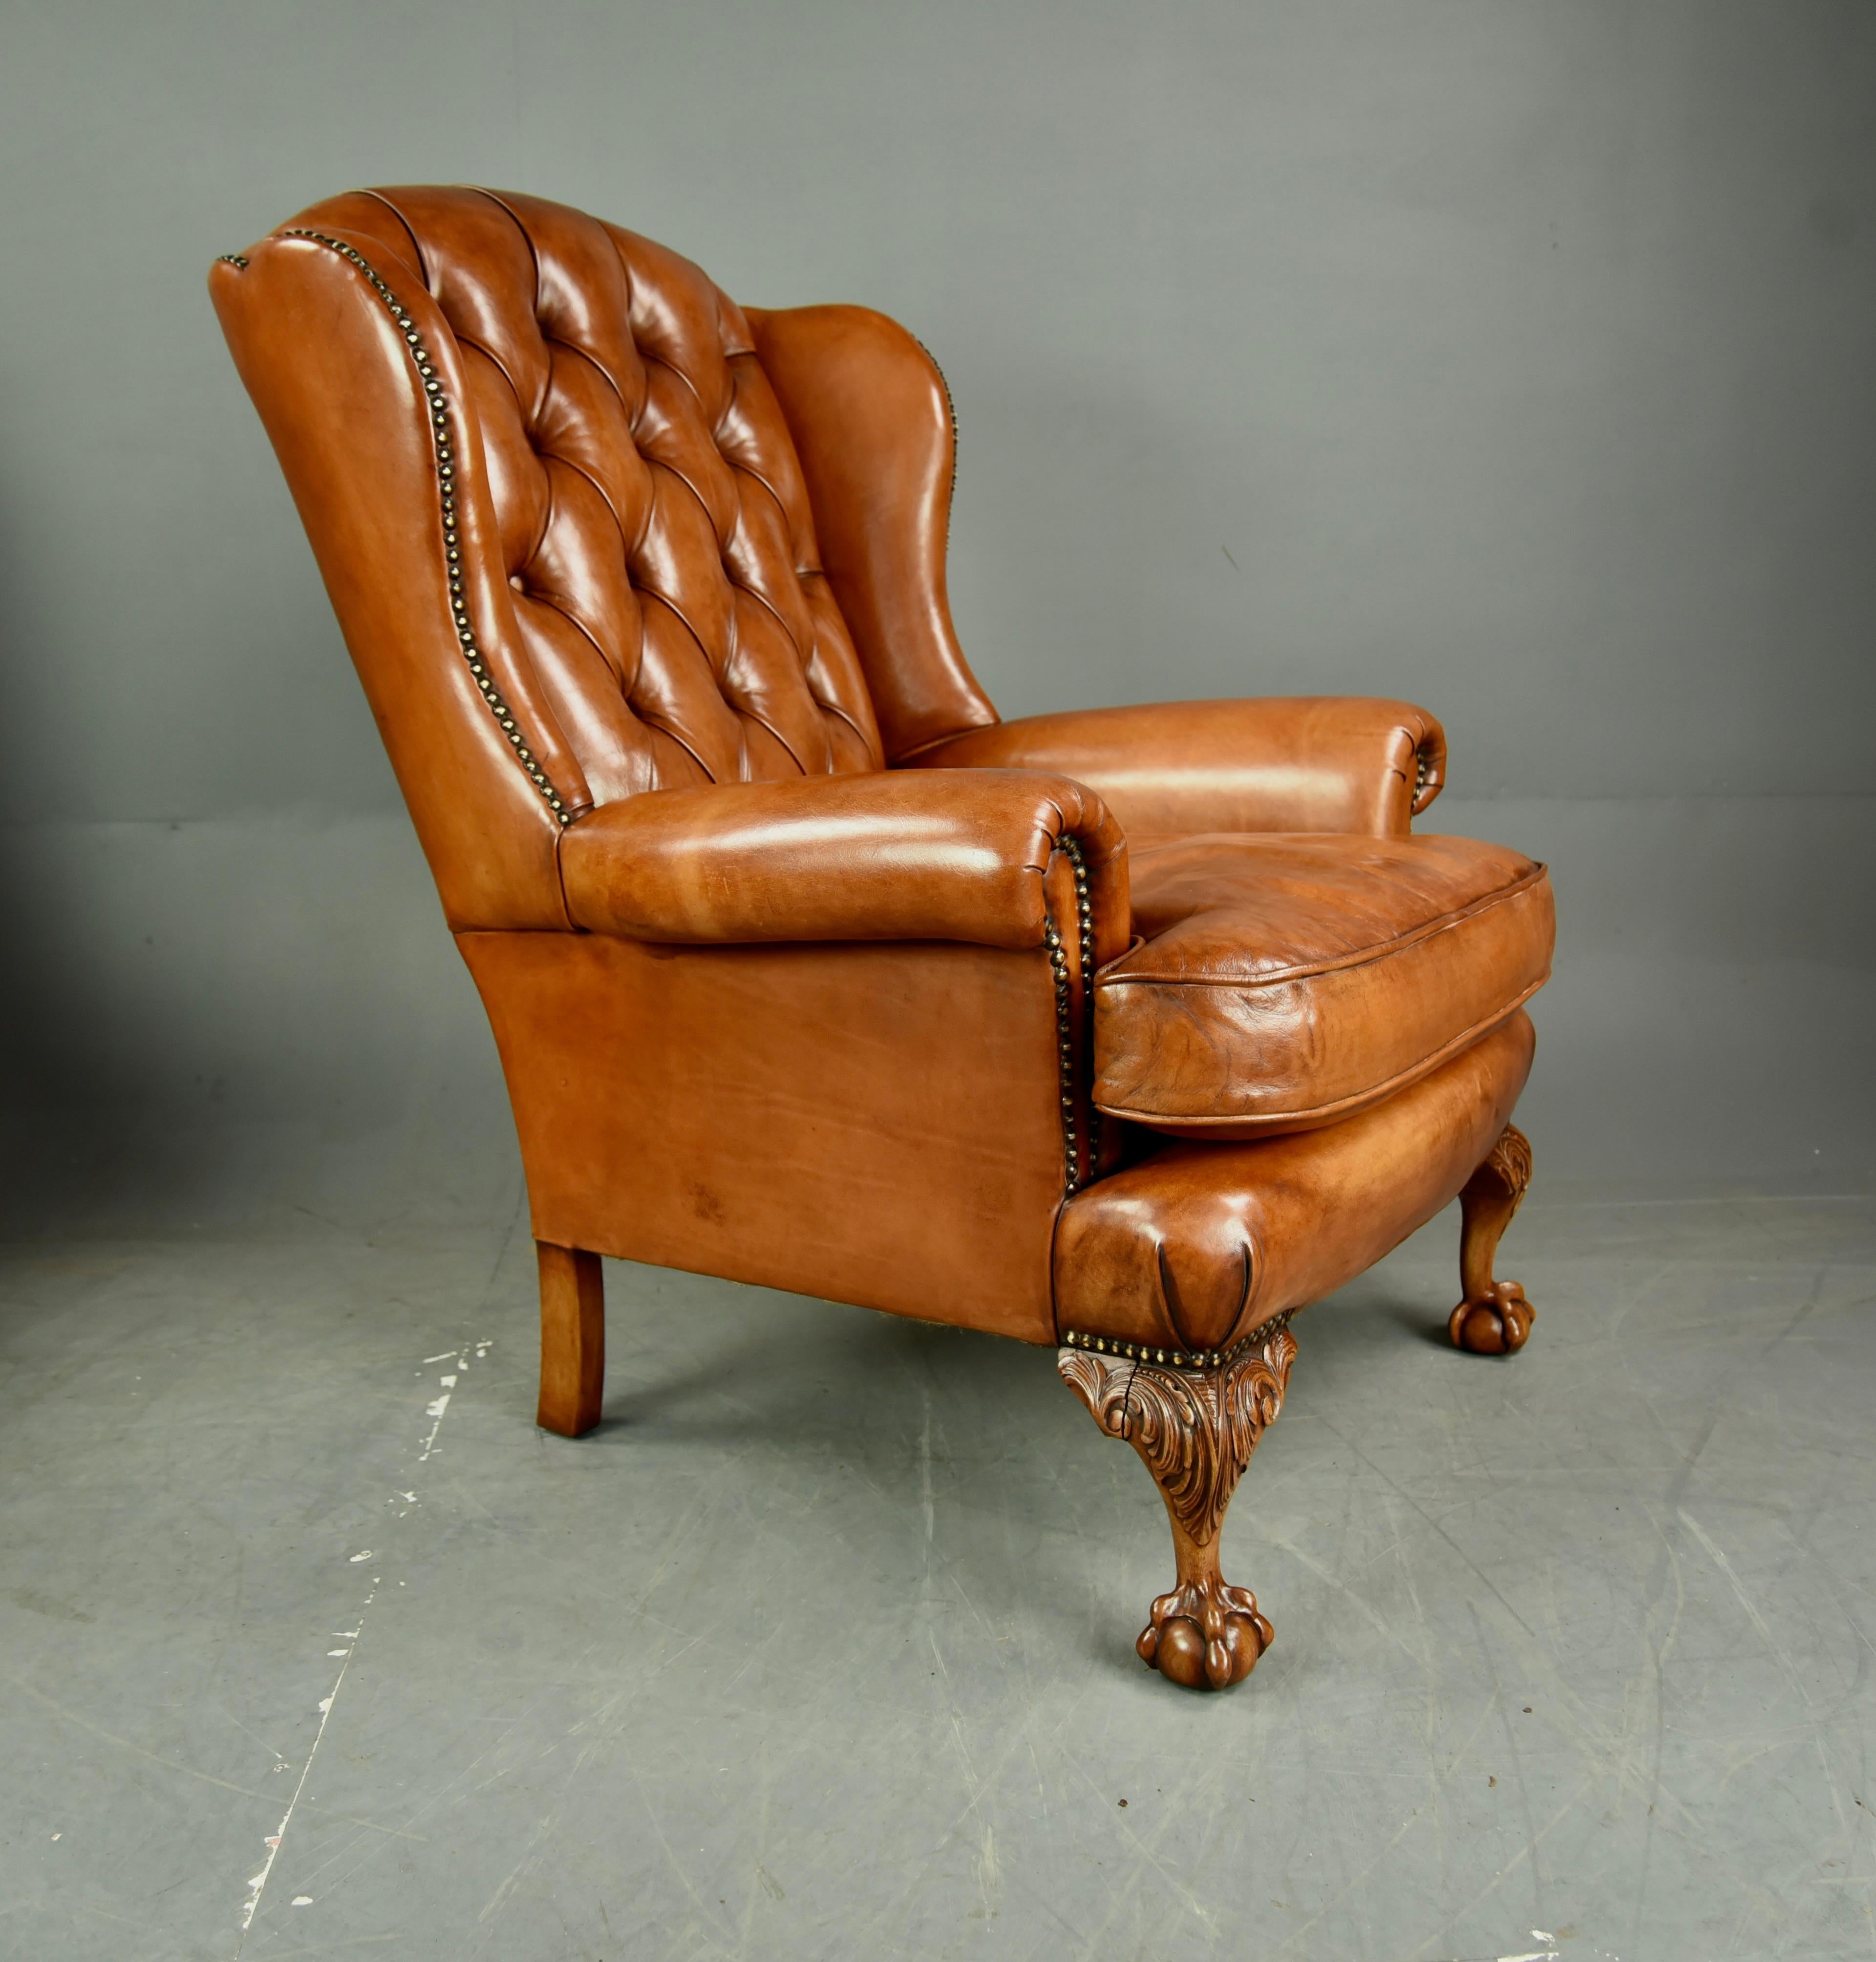 Fine pair of leather wing chairs, circa 1910.
The wing chairs have been fully re furbished to a very high standard. The leather has been hand dyed and finished in the traditional way they are a stunning colour with a wonderful antique patina.
The